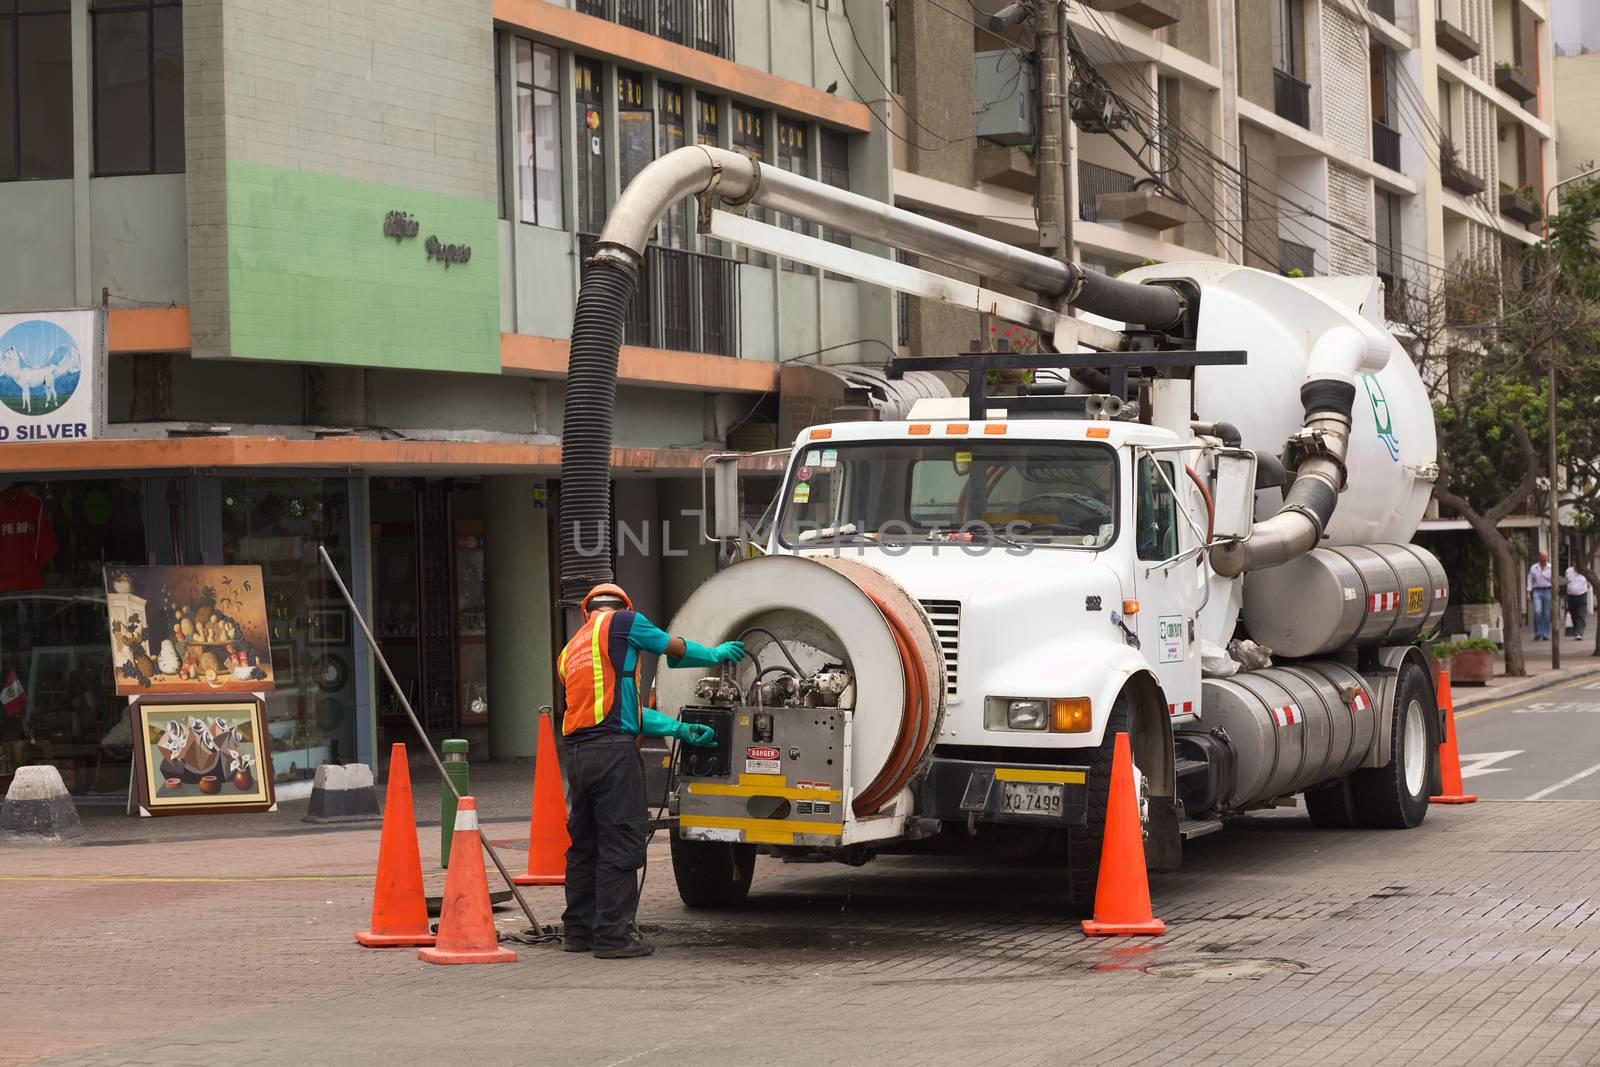 LIMA, PERU - FEBRUARY 11, 2012: Unidentified person of the Concyssa S.A. company cleaning the sewage with the help of a truck on February 11, 2012 in Miraflores, Lima, Peru